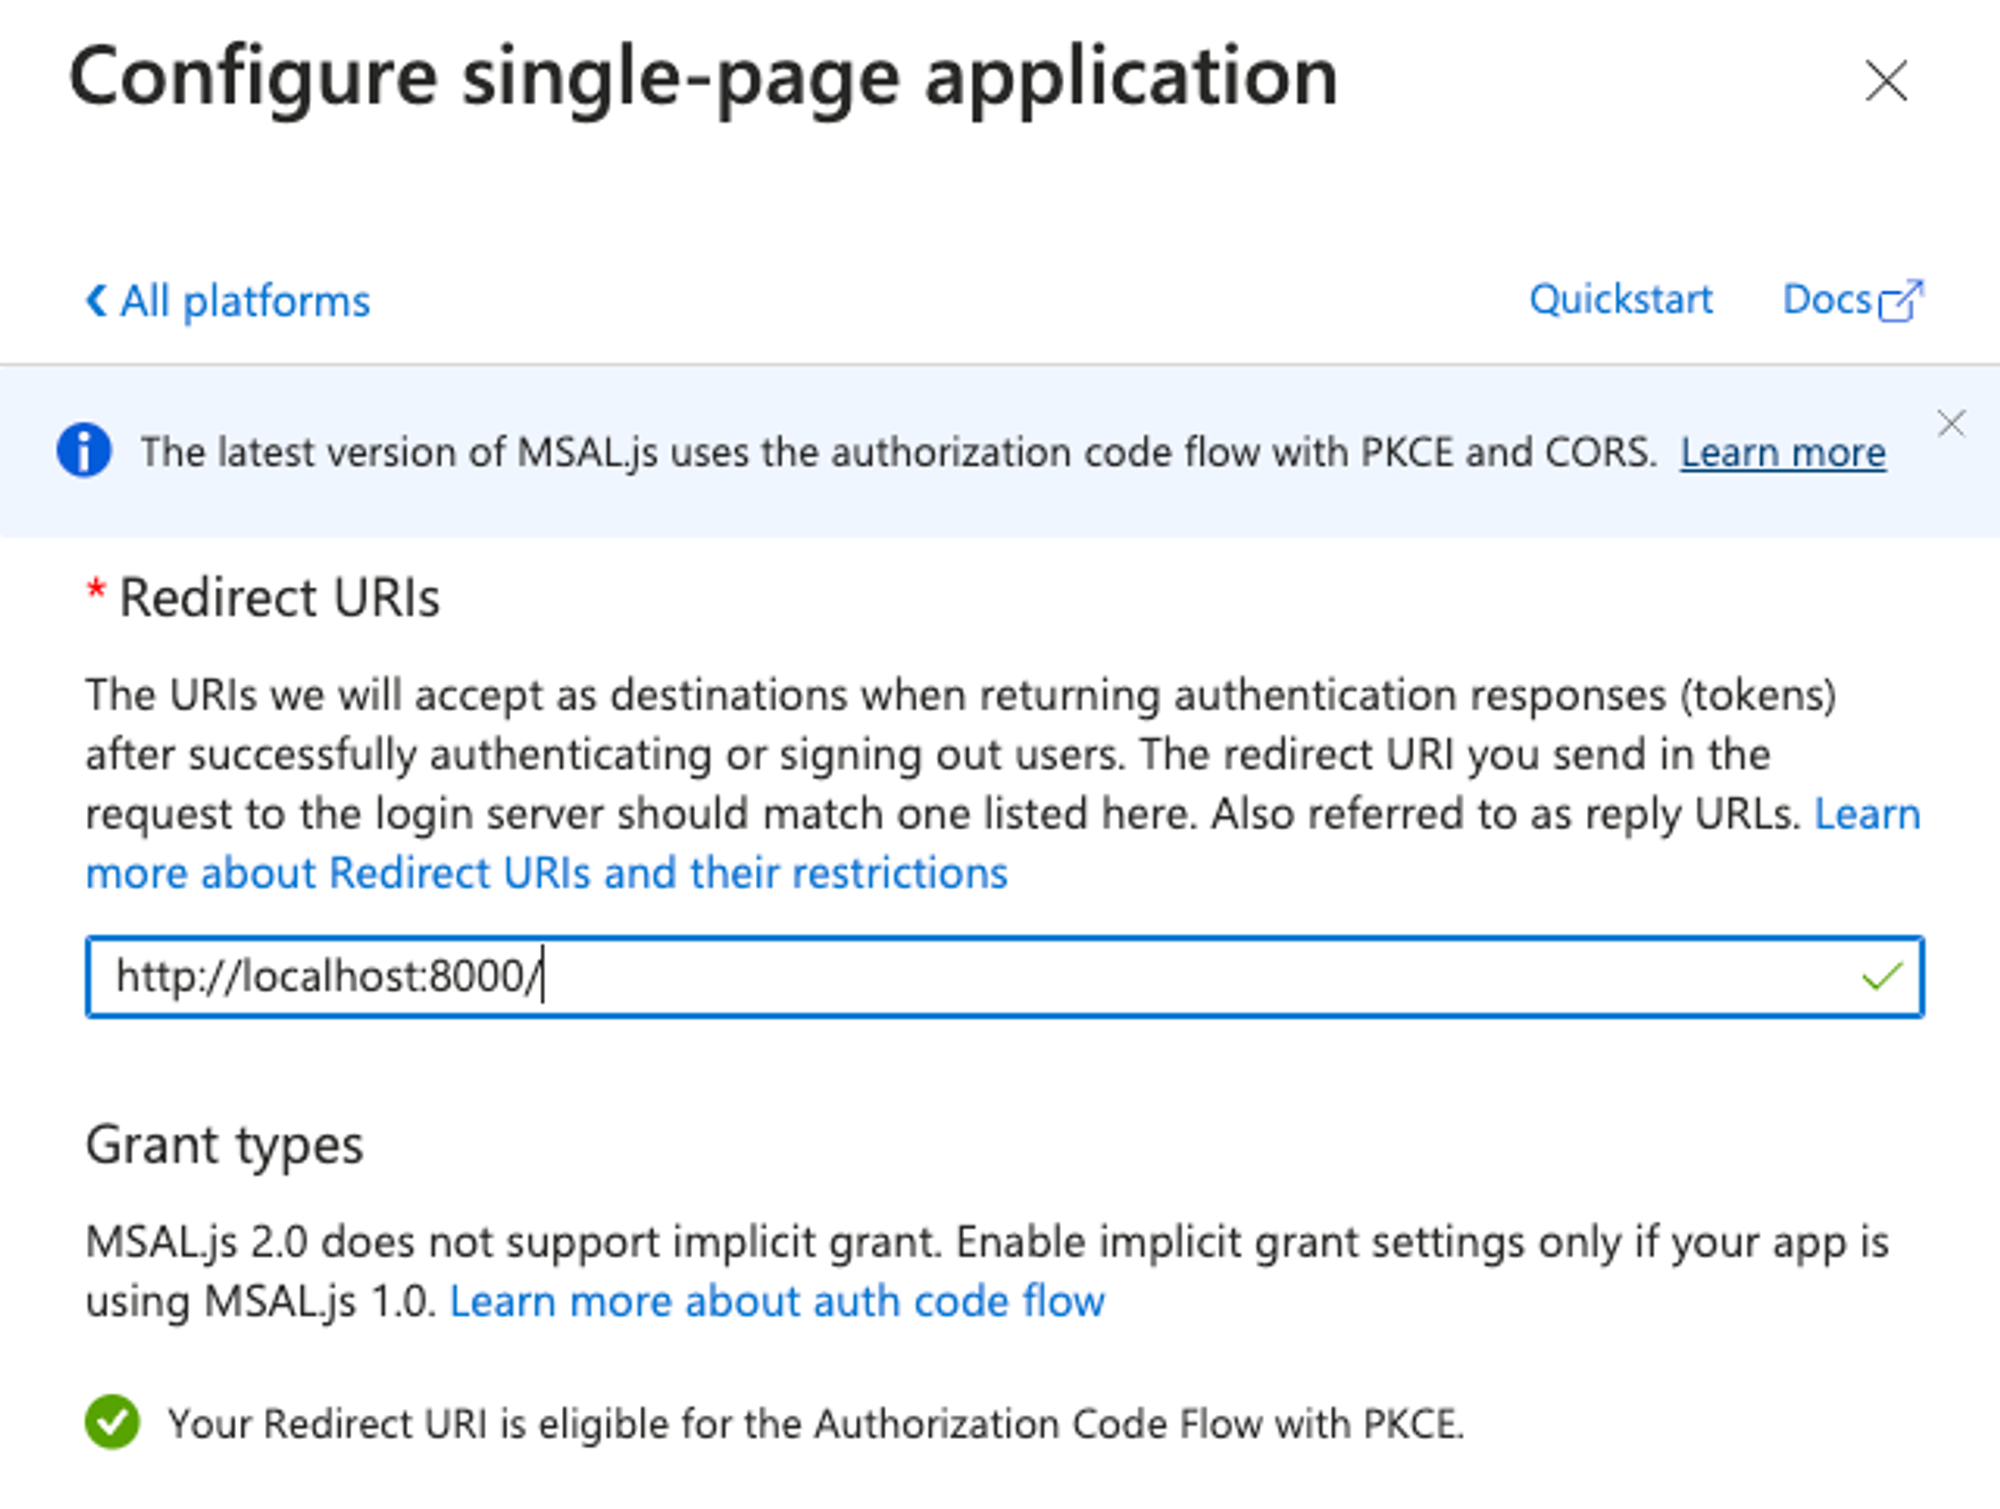 Do not use “Single page application”